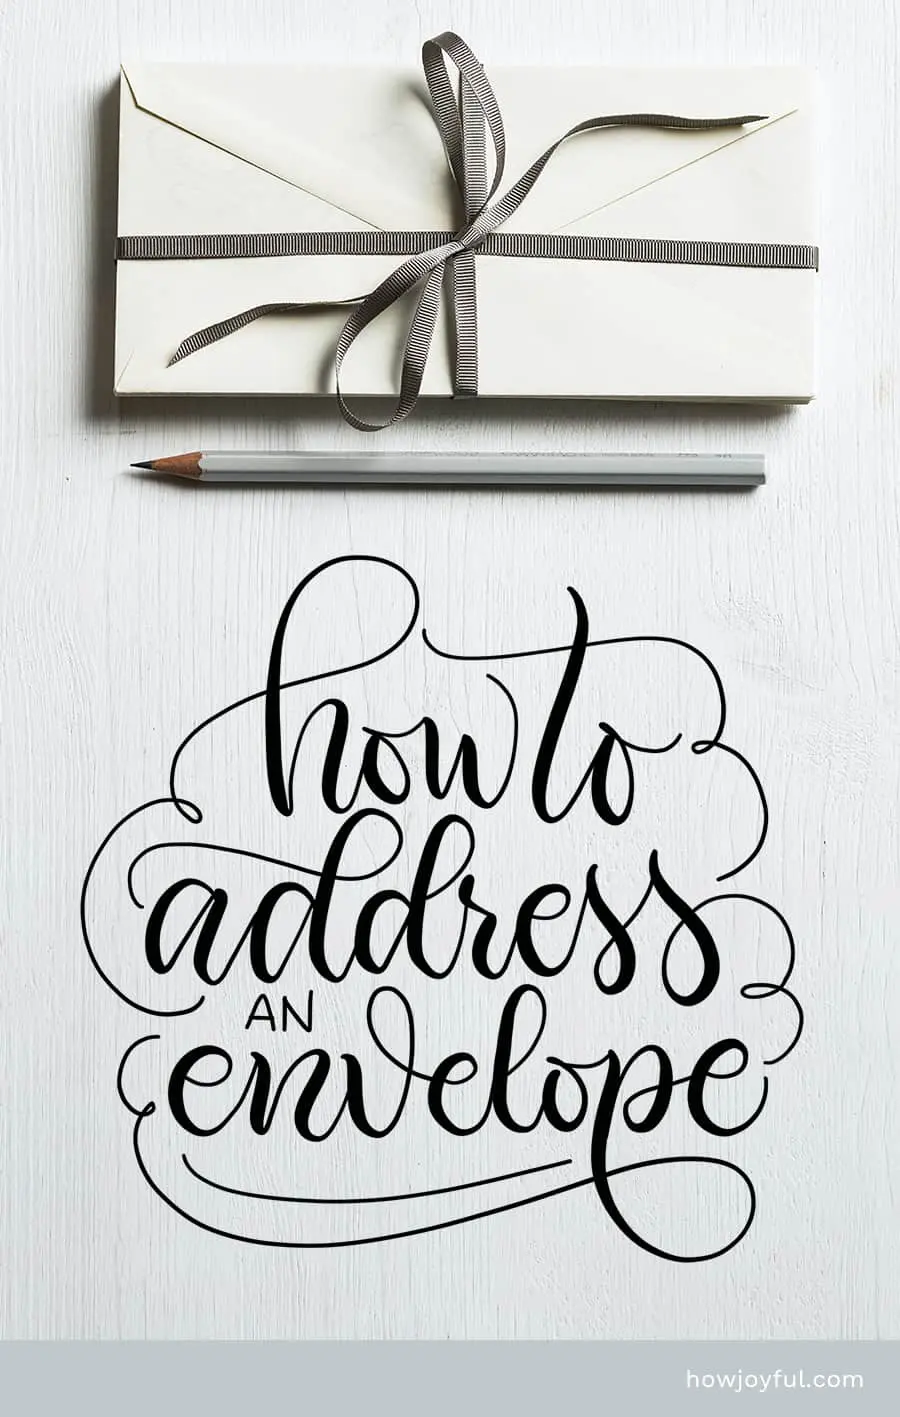 Wrist envelopes perfect for your wedding or Christmas-handlettered envelopes perfect for weddings or christmas